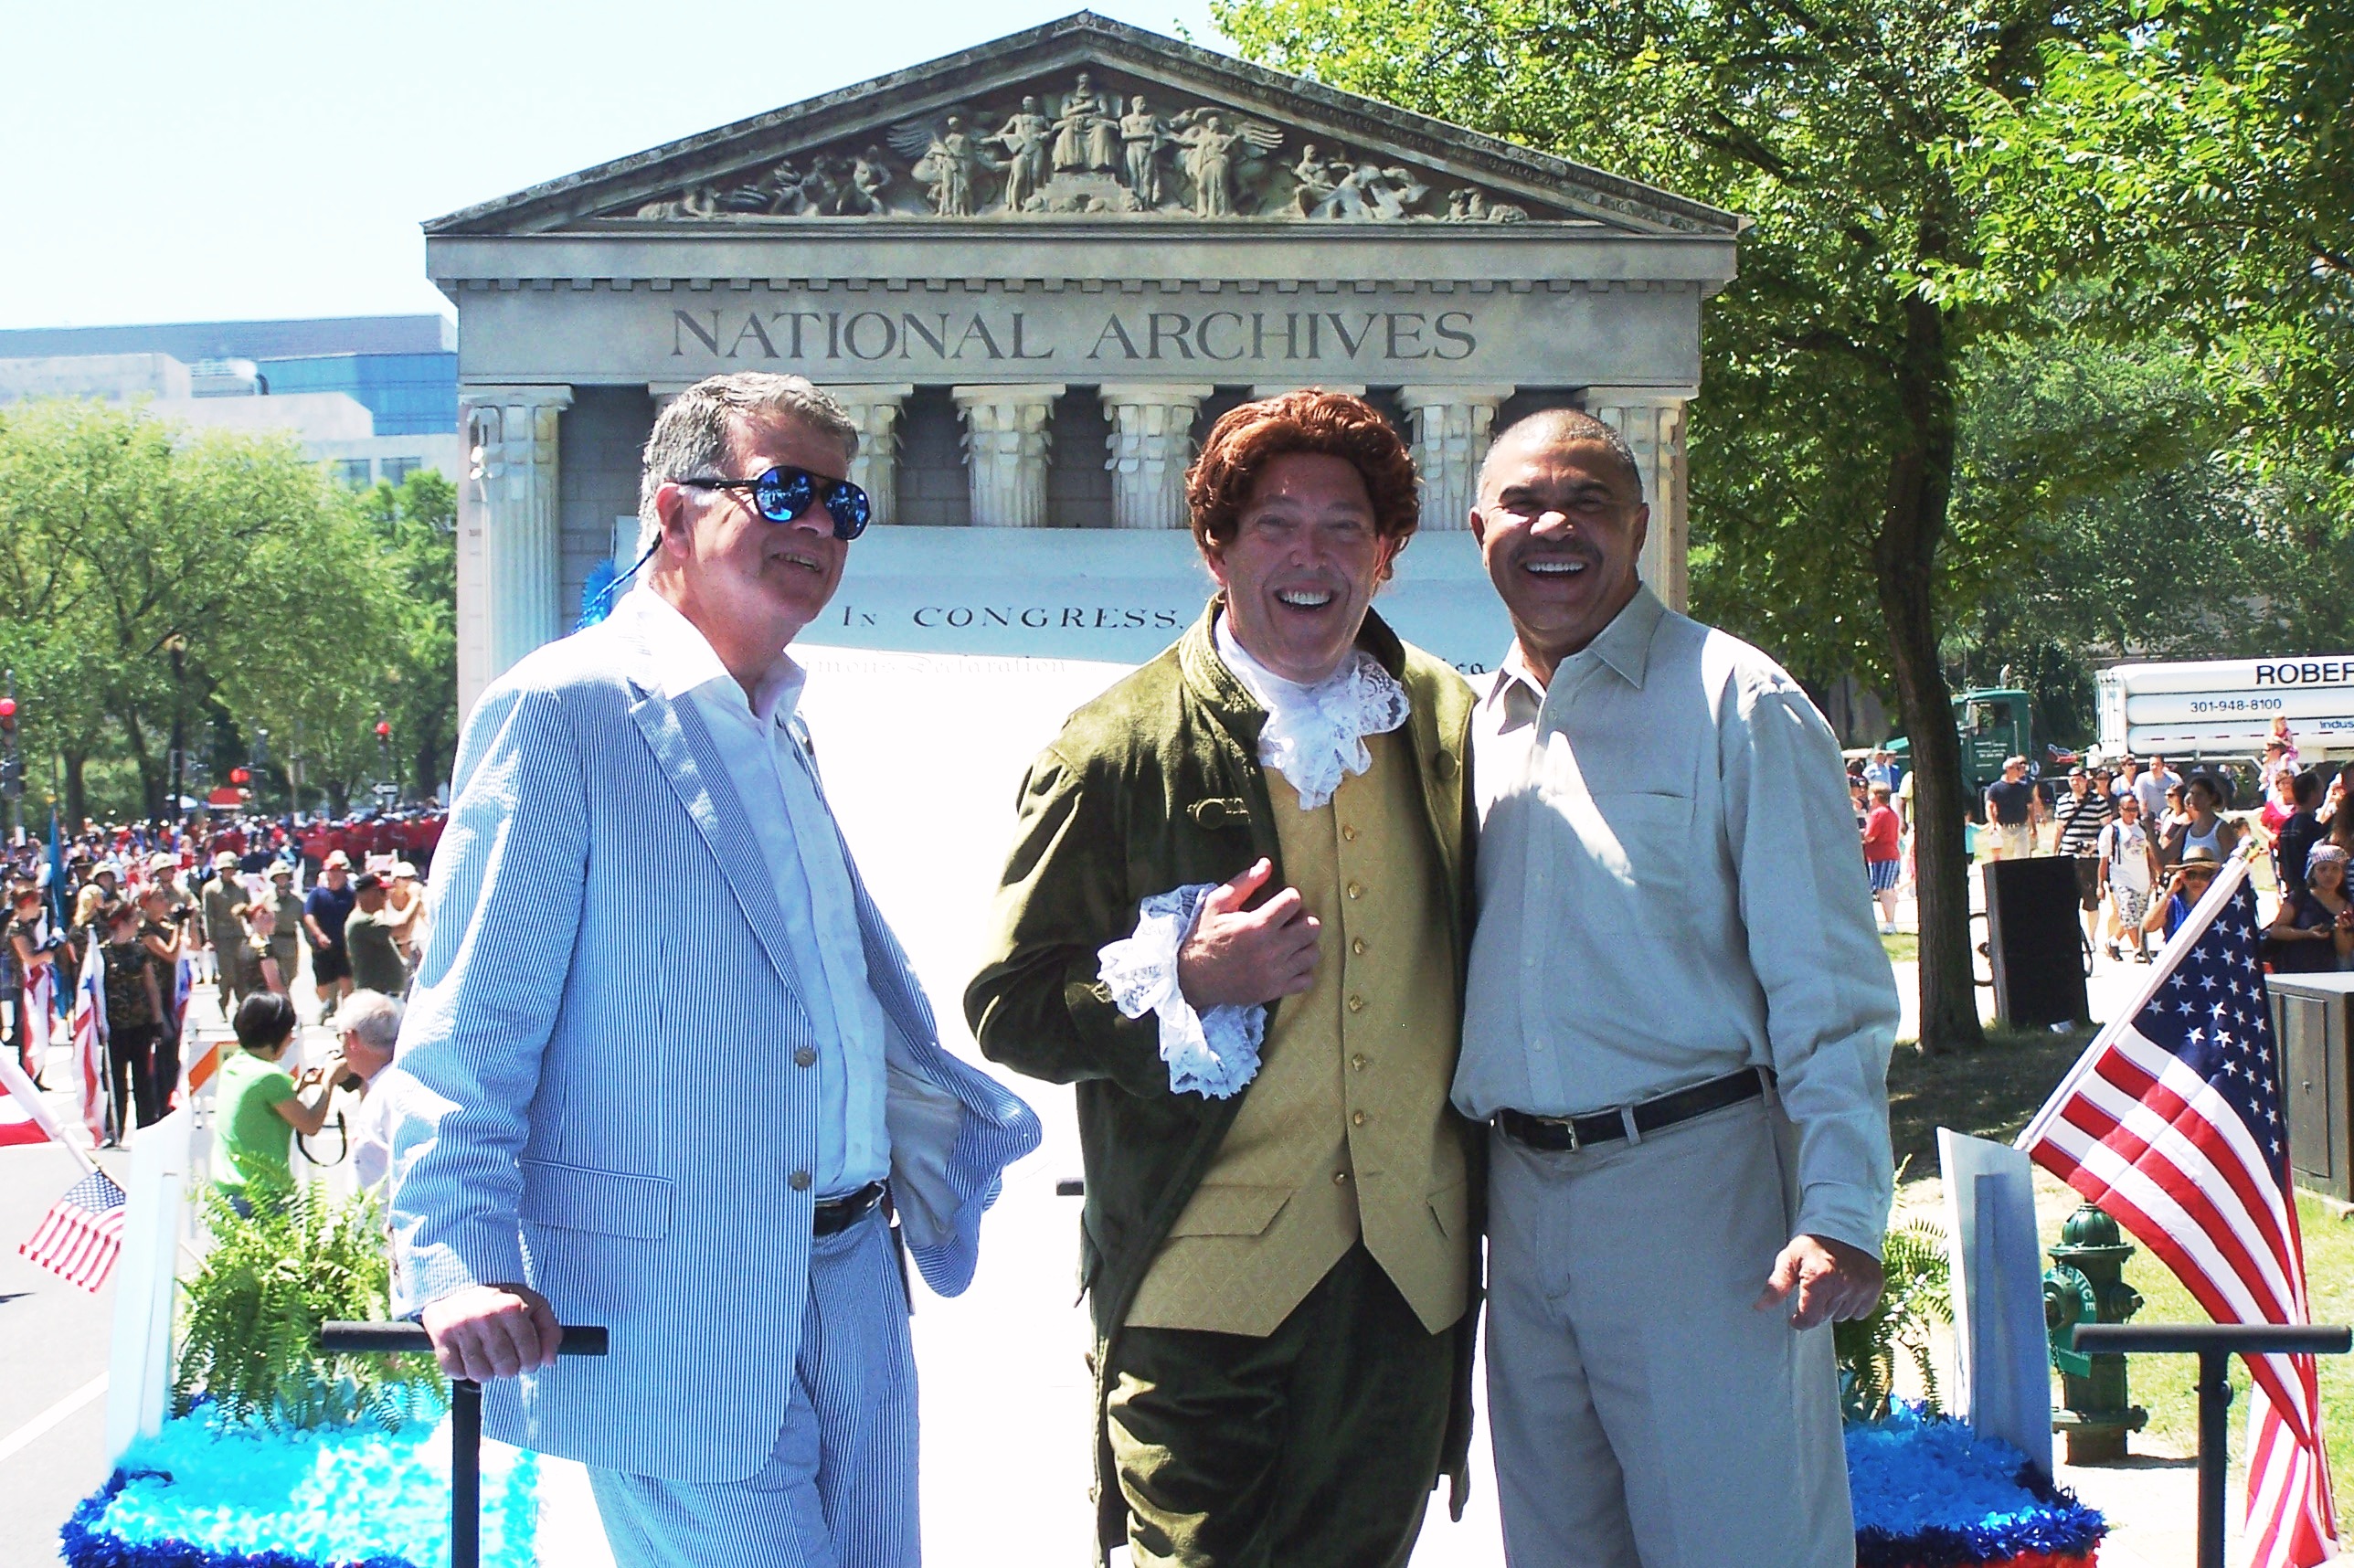 U.S. Archivist David Ferriero, President Thomas Jefferson, Congressman Clay aboard the NARA float in the 4th of July Parade in DC